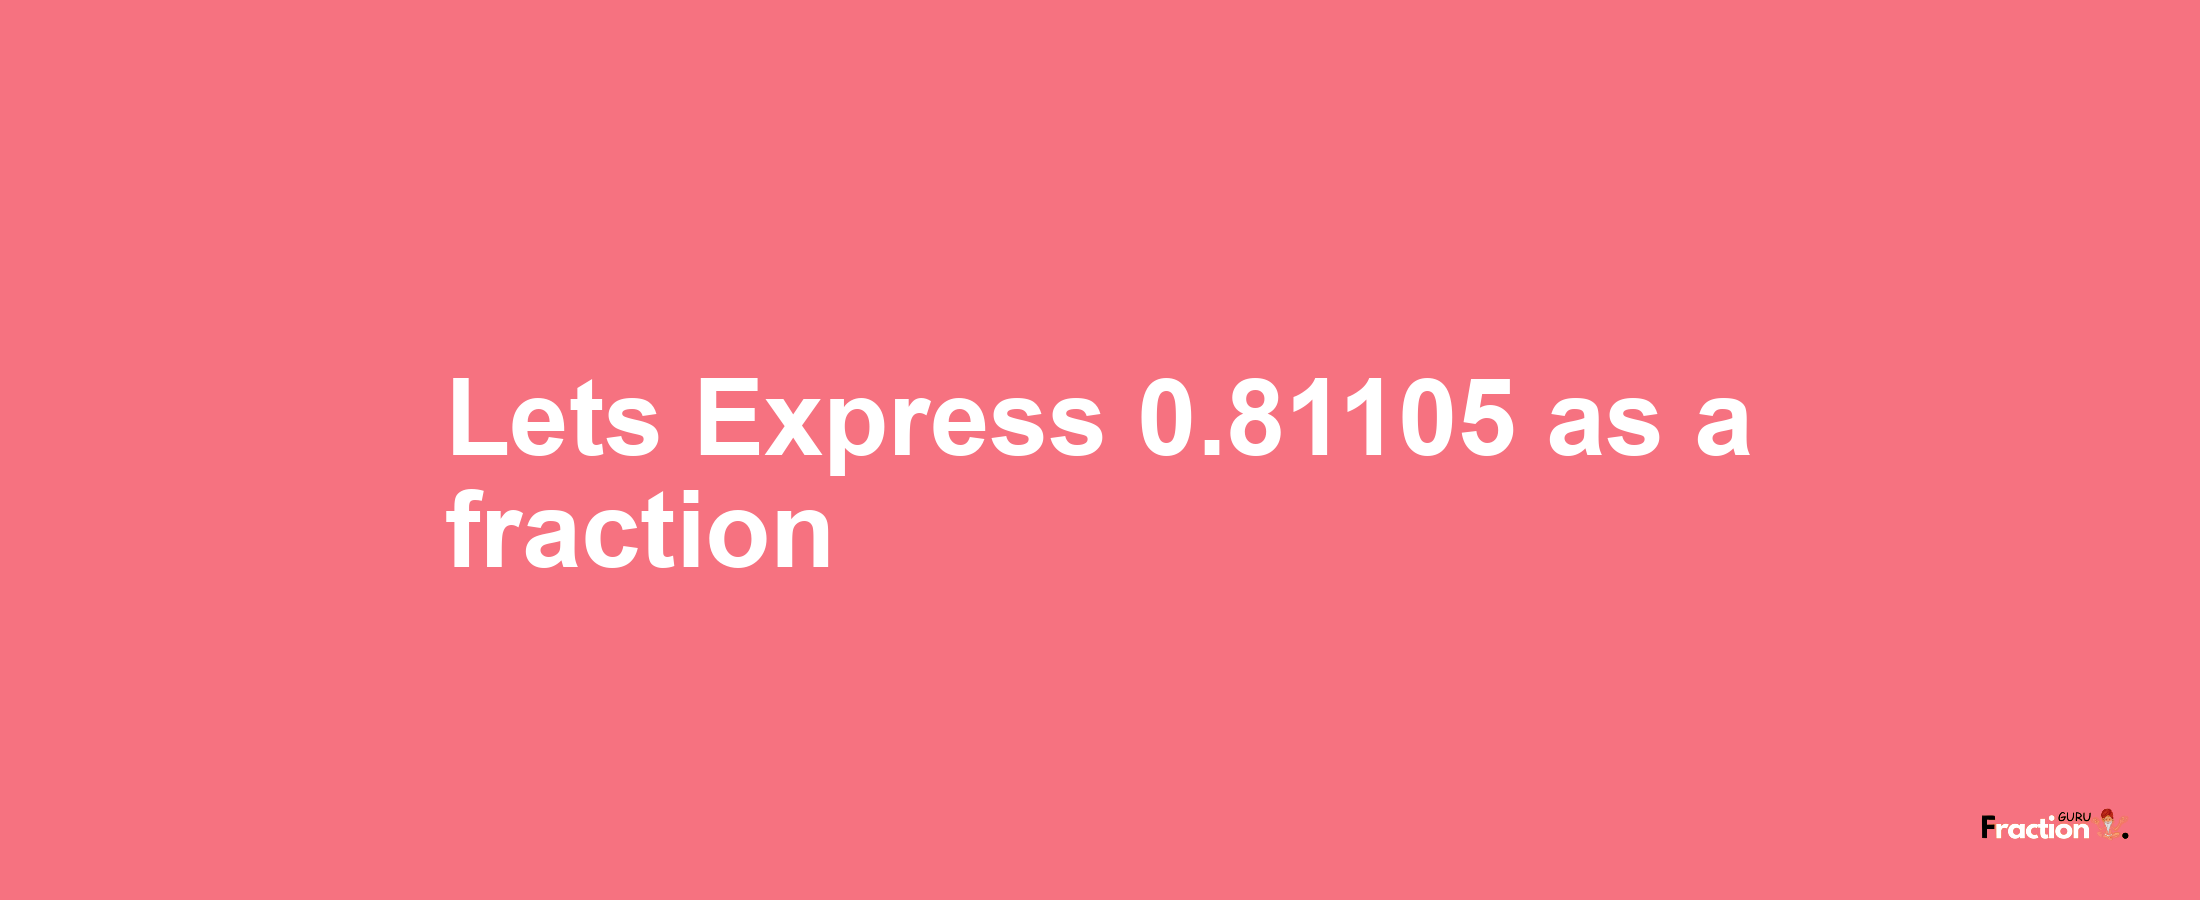 Lets Express 0.81105 as afraction